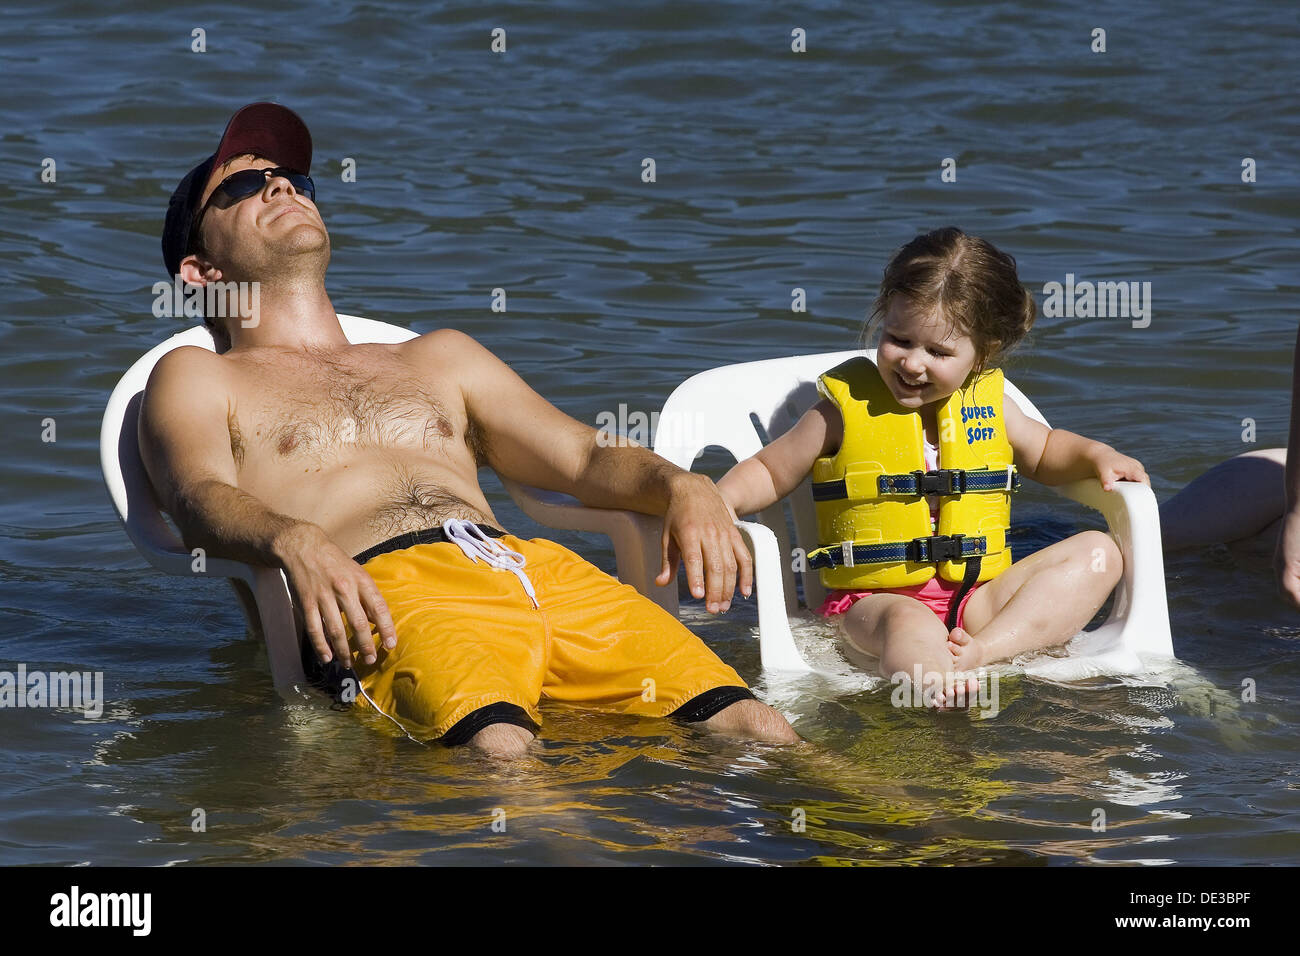 A man, 20-30, and a little girl cool off sitting in chairs in a lake. Stock Photo